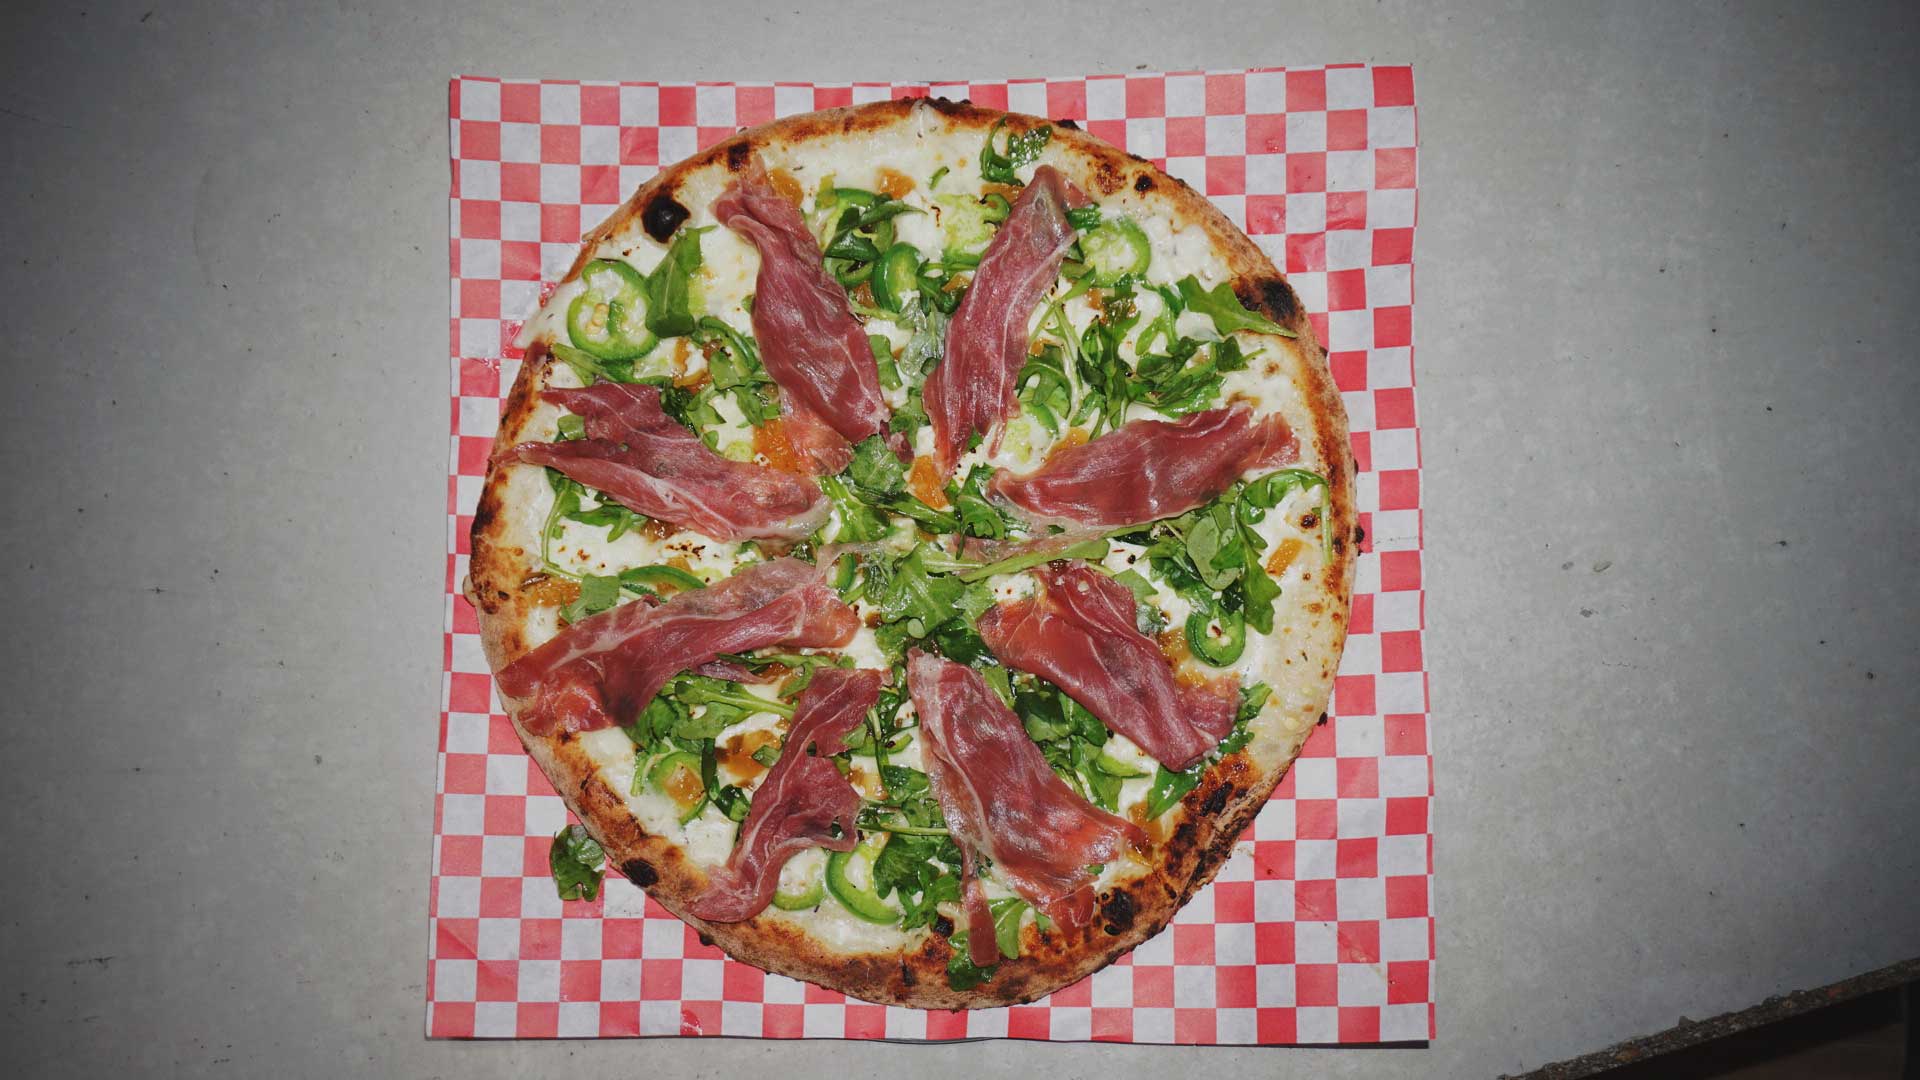 The Maui Wowi Pizza from Red Bench Pizza